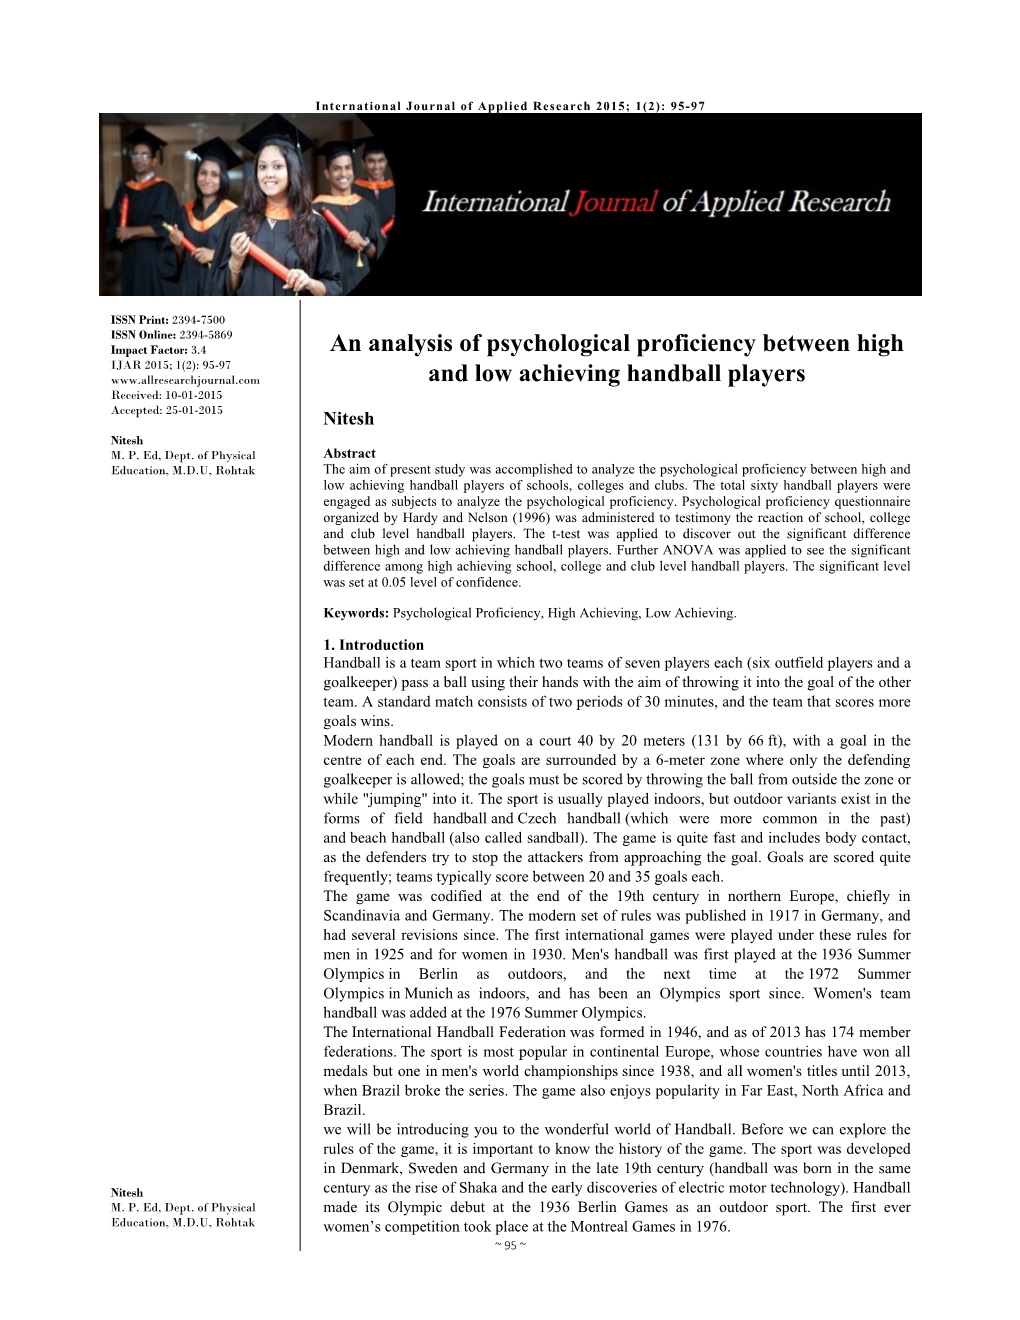 An Analysis of Psychological Proficiency Between High and Low Achieving Handball Players